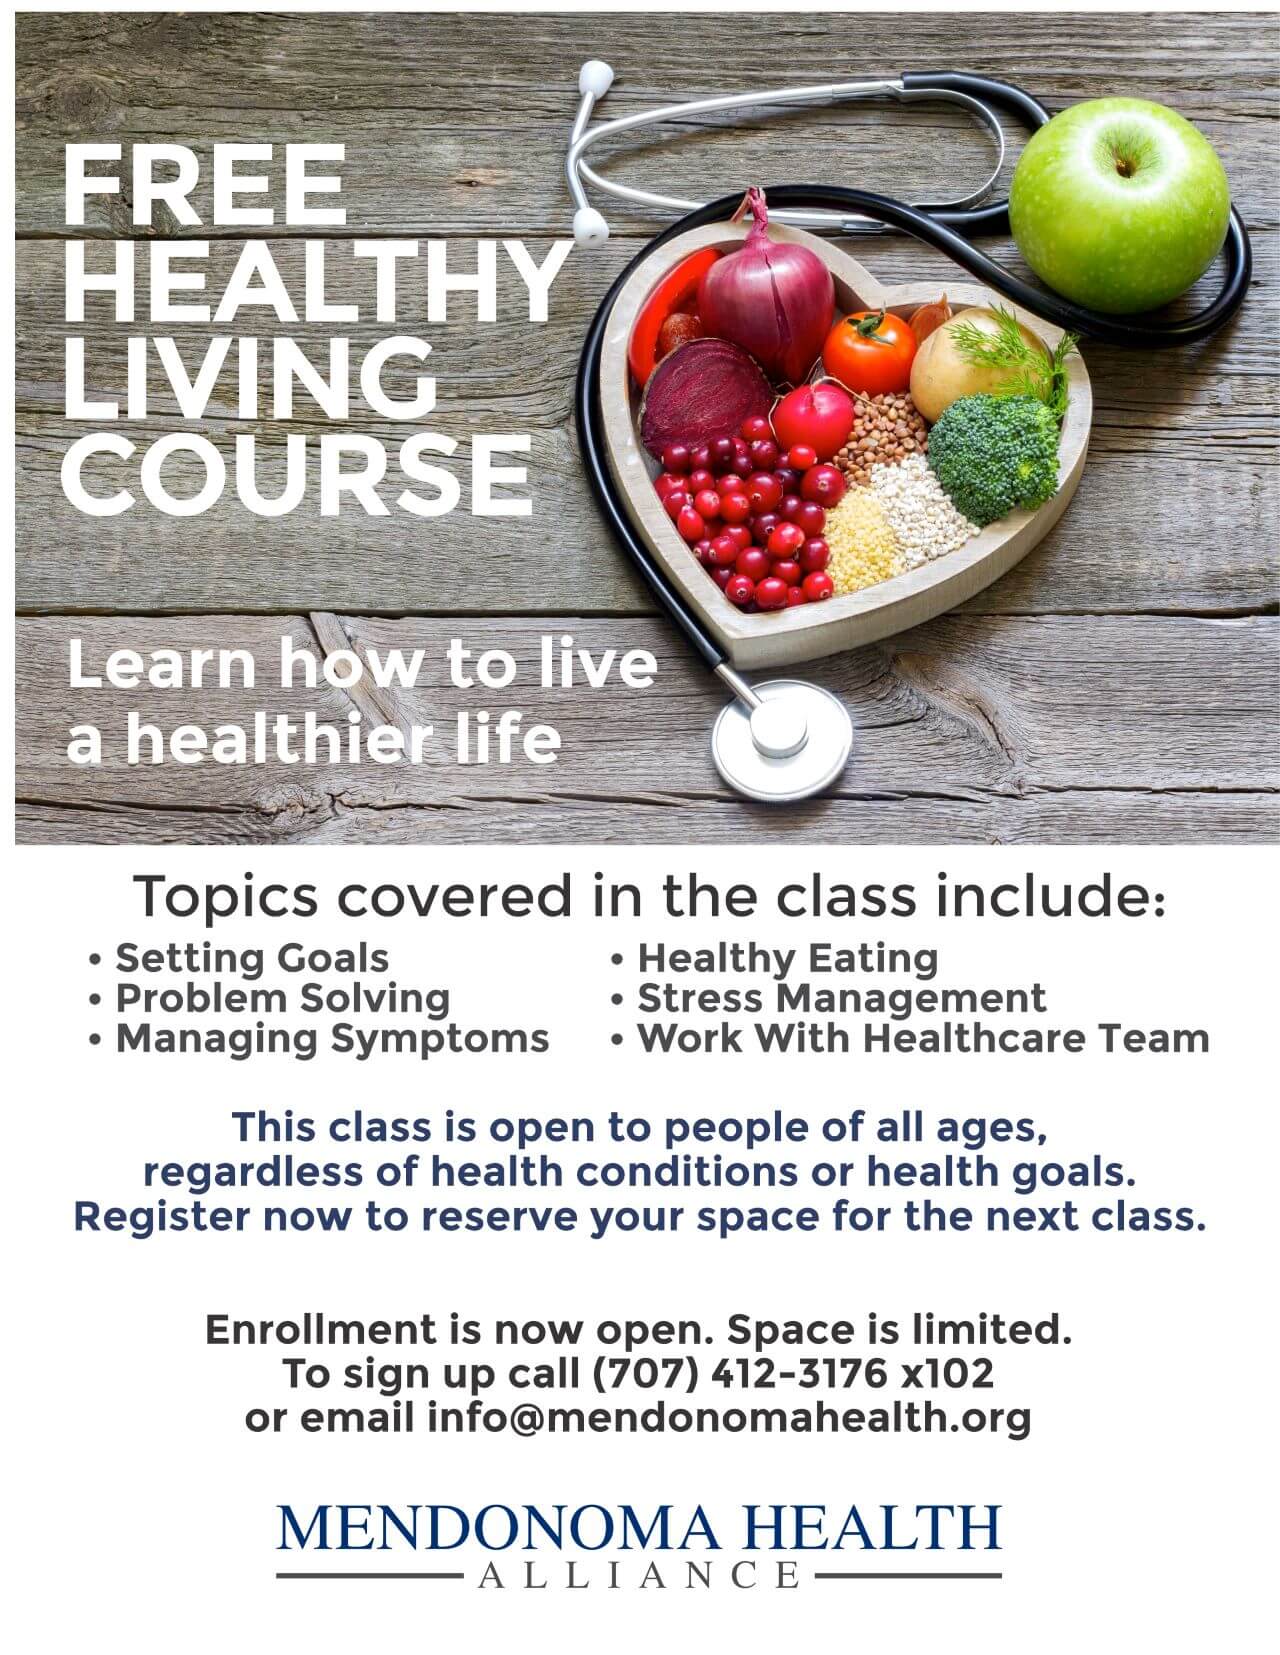 A flyer for Mendonoma Health Alliance with a picture that has a heart shaped dish filled with fresh garden produce and a stethoscope wrapped around the dish. The Healthy Living class will be held in person later in 2022. Topics include setting goals, problem solving, managing symptoms, healthy eating, stress management and is open to people of all ages, regardless of health conditions. Enrollment is open now by calling (707) 412-3176 x102.